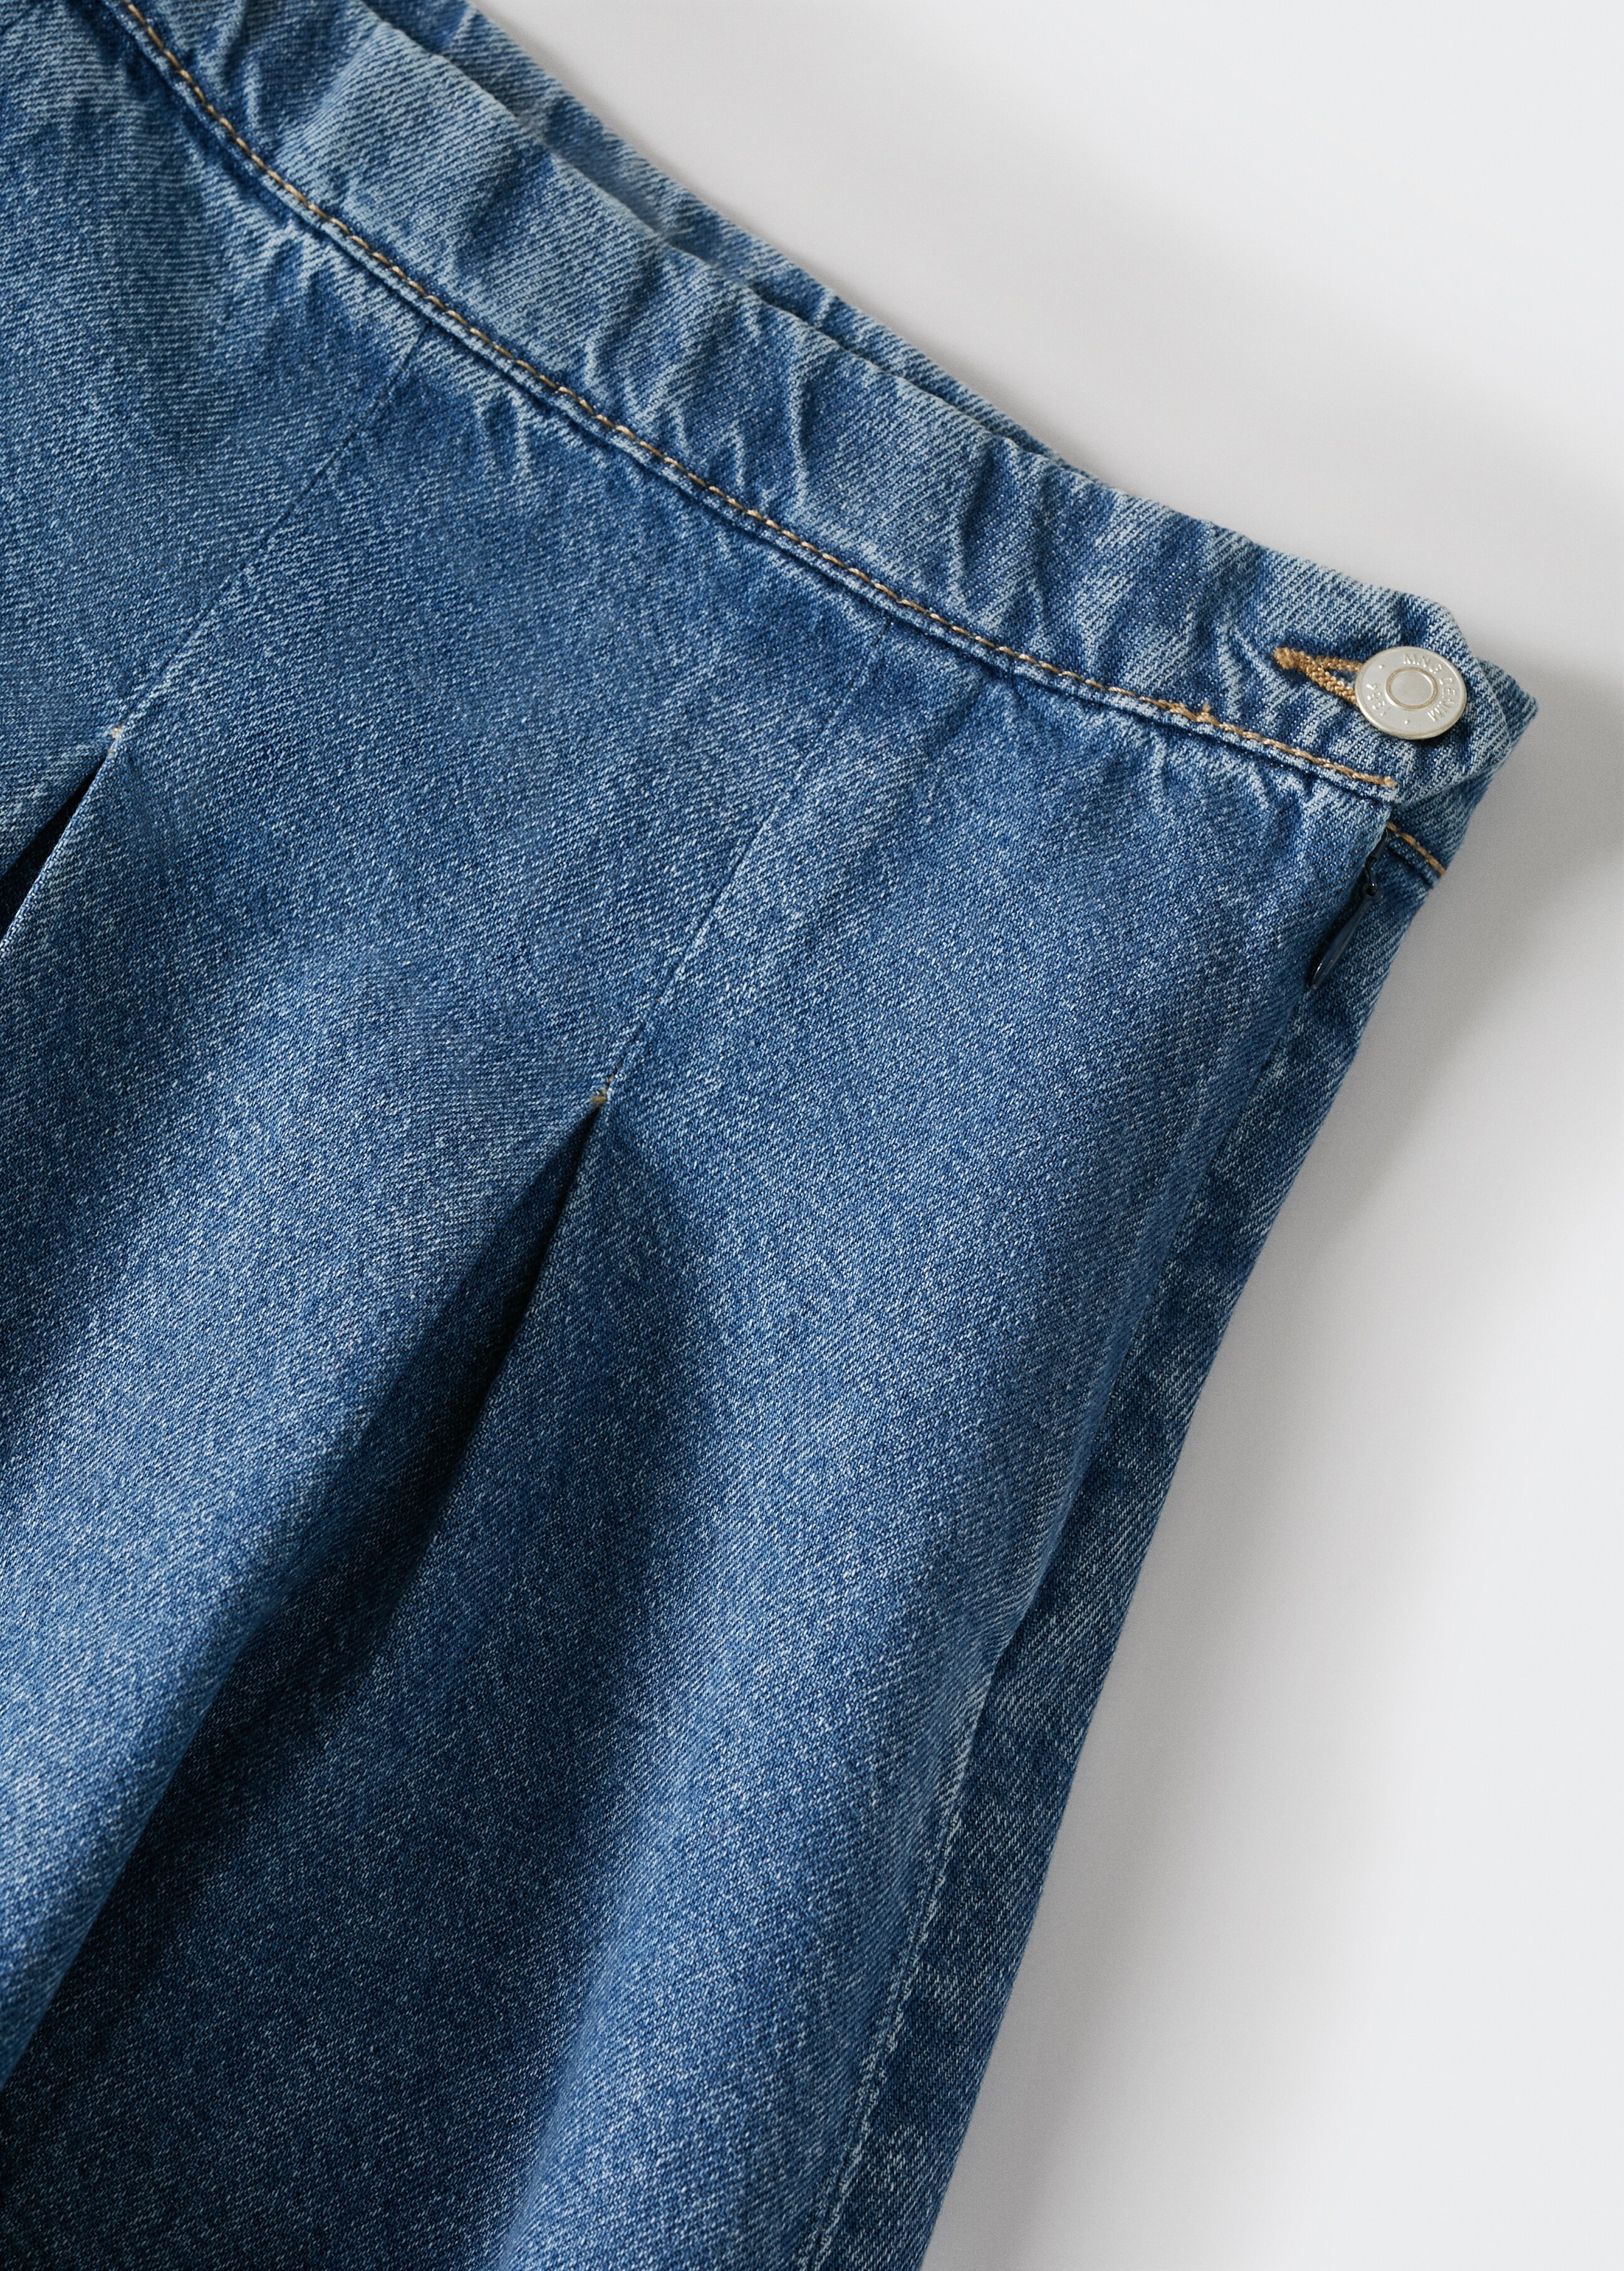 Pleated denim skirt - Details of the article 8